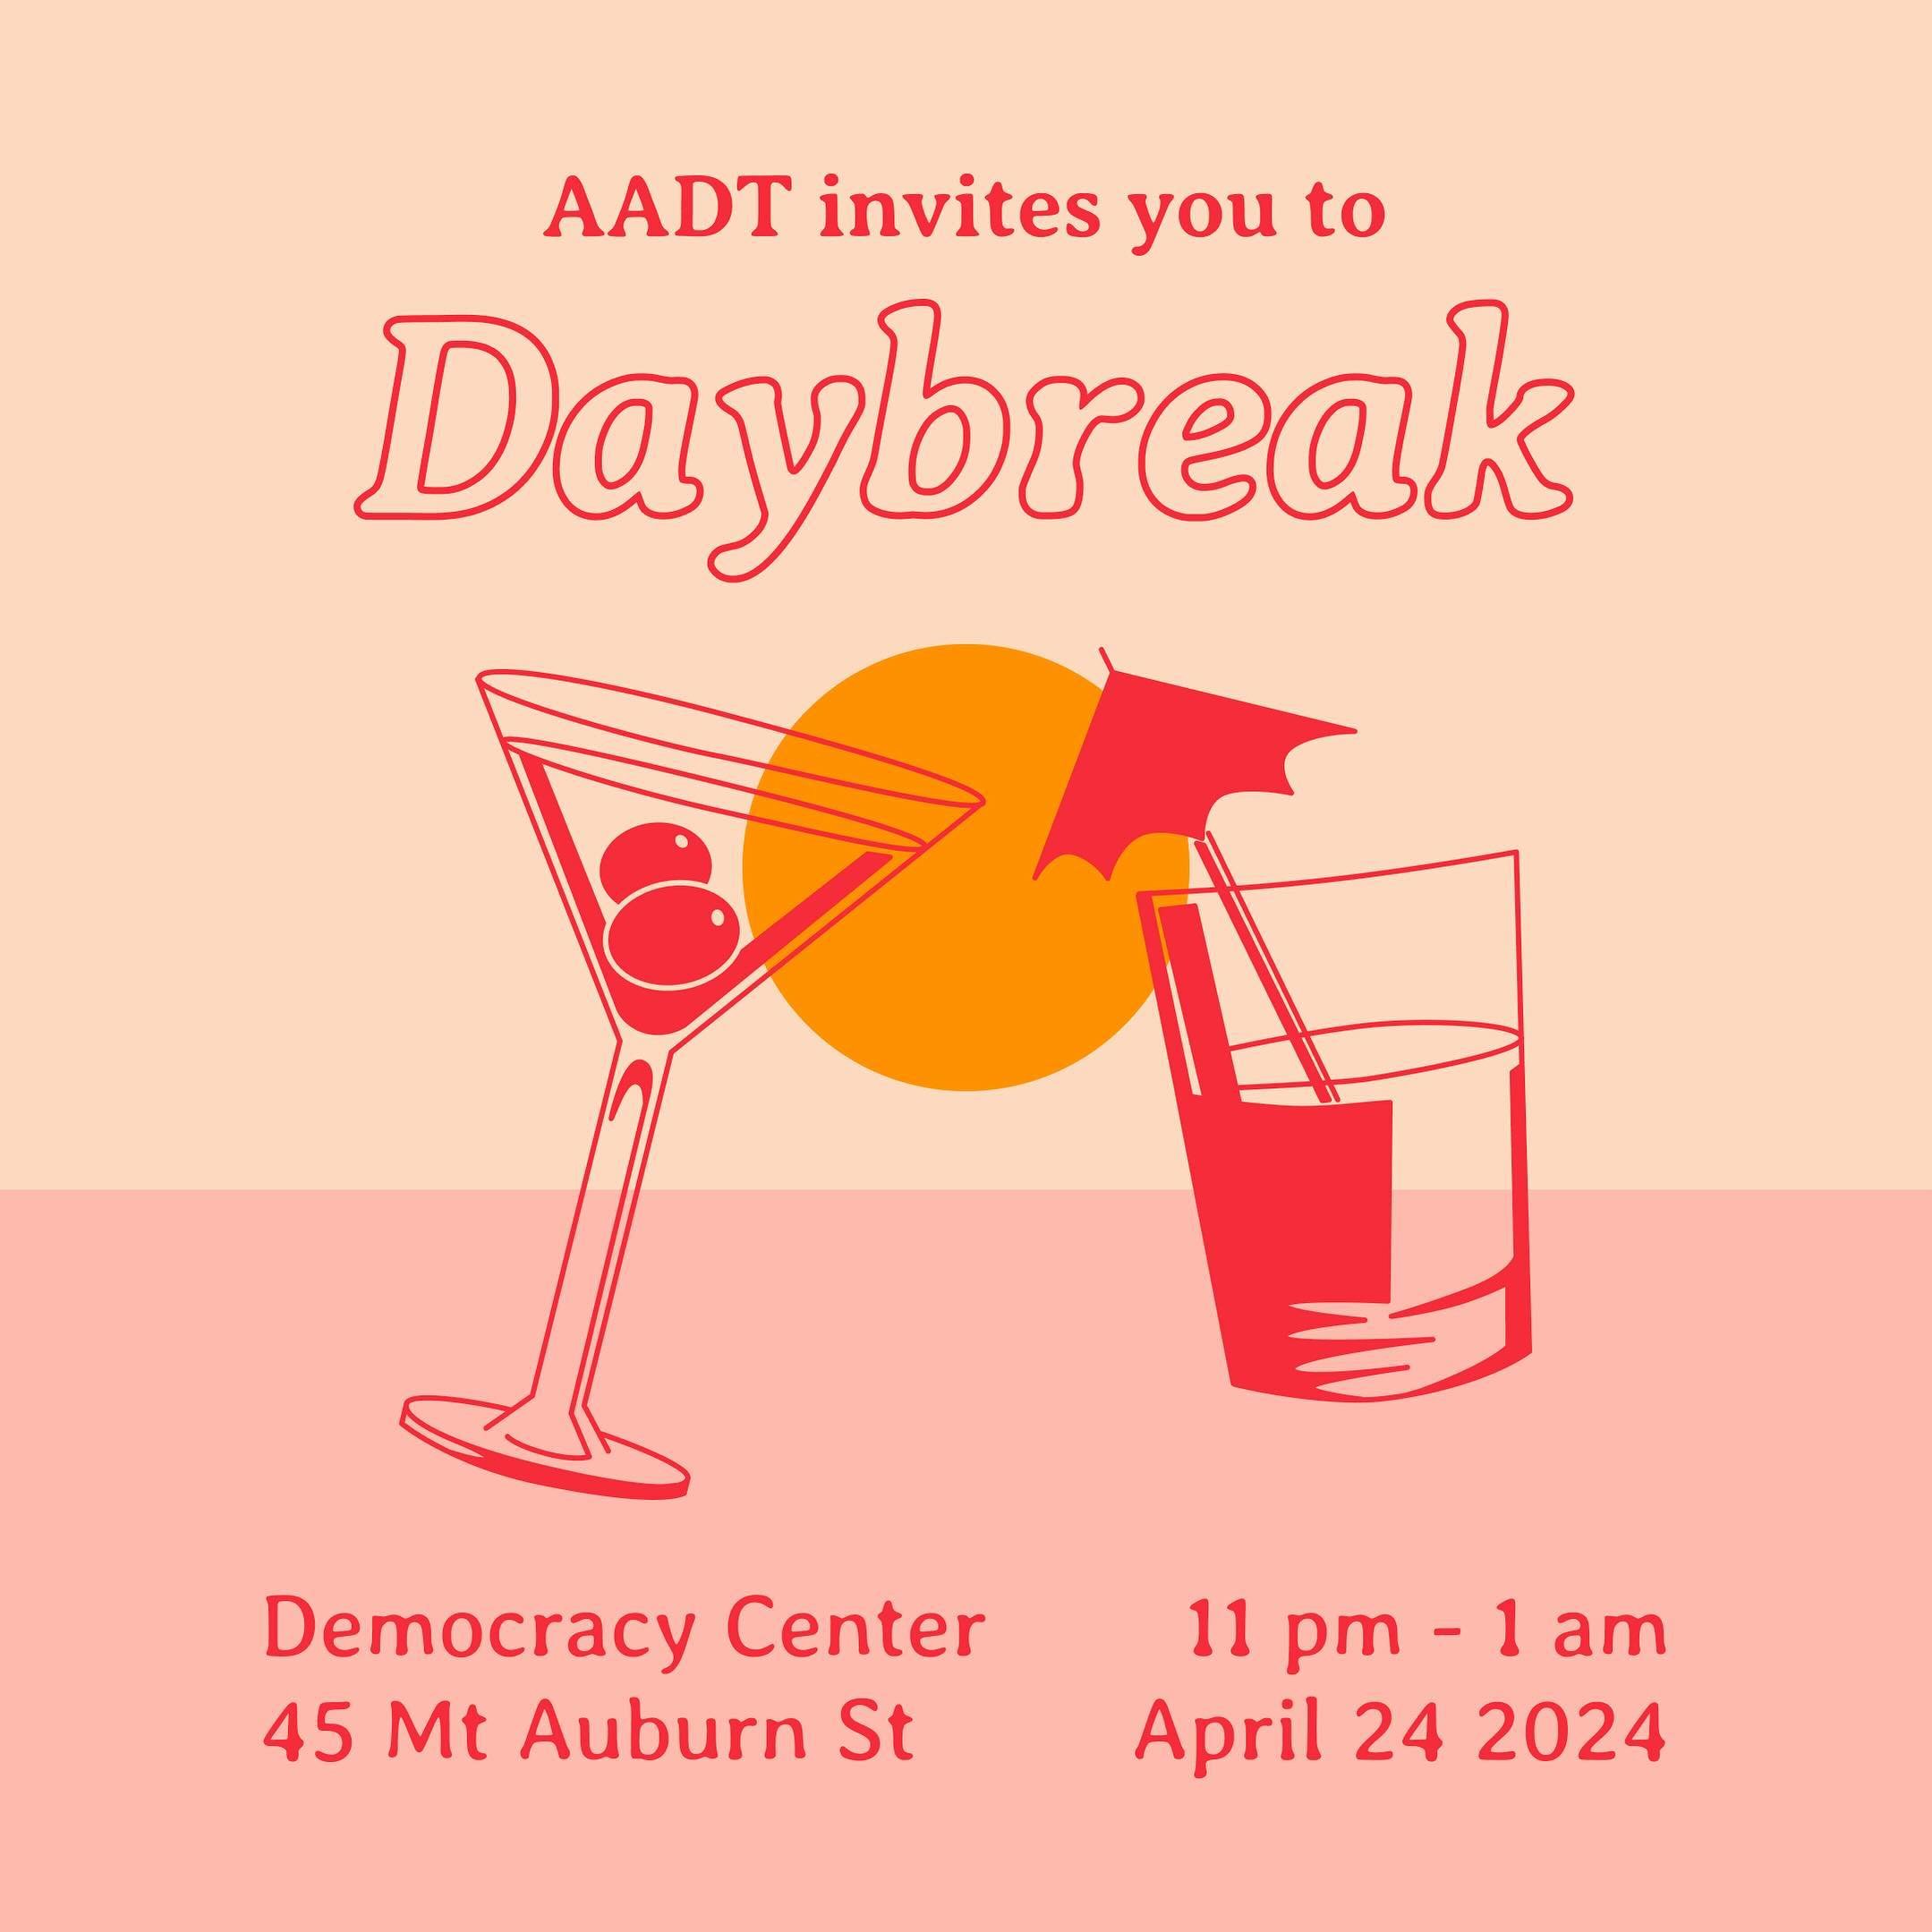 👀 You know what time it is 👀 

We aren&rsquo;t done just yet. With a legendary Eastbound show comes a legendary AADT end-of year PARTY 🤩 Our annual afterparty Daybreak is THIS WEDNESDAY, April 24th in the Democracy Center from 11PM - 1AM 🌅 Music 